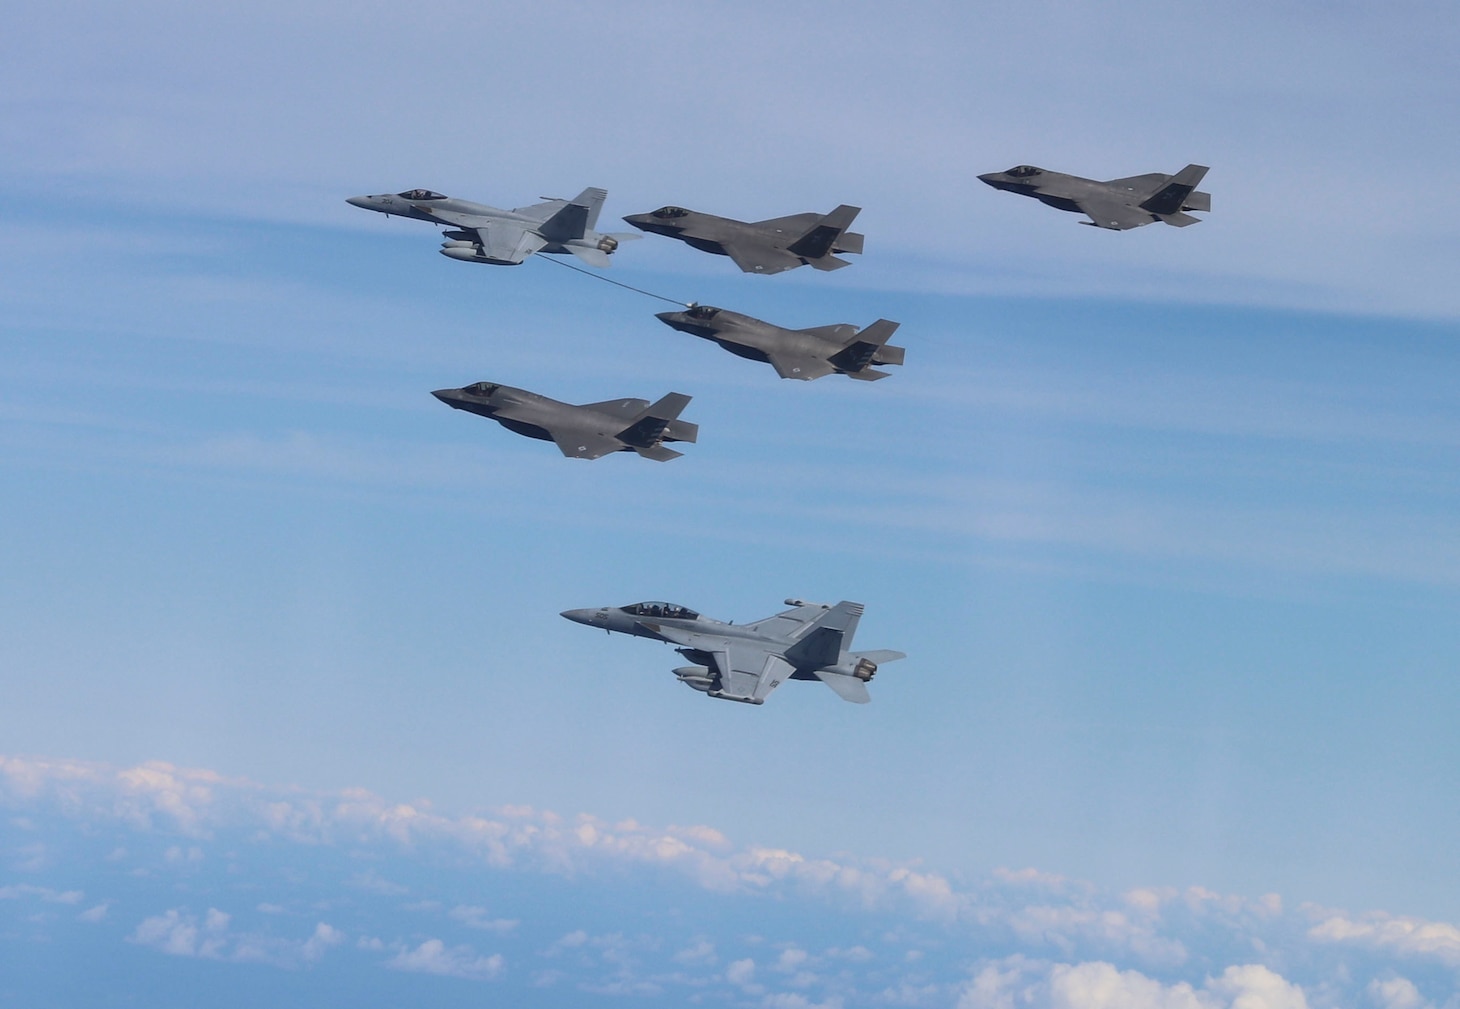 PHILIPPINE SEA (Aug. 26, 2021) Two F-35B Lightning II from Marine Fighter Attack Squadron (VMFA) 211, embarked on the Royal Navy aircraft carrier HMS Queen Elizabeth (R08); two F-35C Lightning II assigned to Strike Fight Squadron (VFA) 147; an EA-18G Growler, assigned to U.S. Navy Electronic Attack Squadron (VAQ) 136; and an F/A-18E Super Hornet, assigned to Strike Fighter Squadron (VFA) 192, embarked on aircraft carrier USS Carl Vinson (CVN 70), conduct mid-air refueling in support of joint interoperability flights between Carl Vinson Carrier Strike Group (VINCSG) and U.K. Carrier Strike Group (CSG-21), Aug. 26, 2021. Carl Vinson Carrier Strike Group is on deployment in the U.S. 7th Fleet area of operations to enhance interoperability with allies and partners, and to serve as a ready-response force in support of a free and open Indo-Pacific region. (U.S. Navy photo by Lt. Cmdr. Bart Crowder)